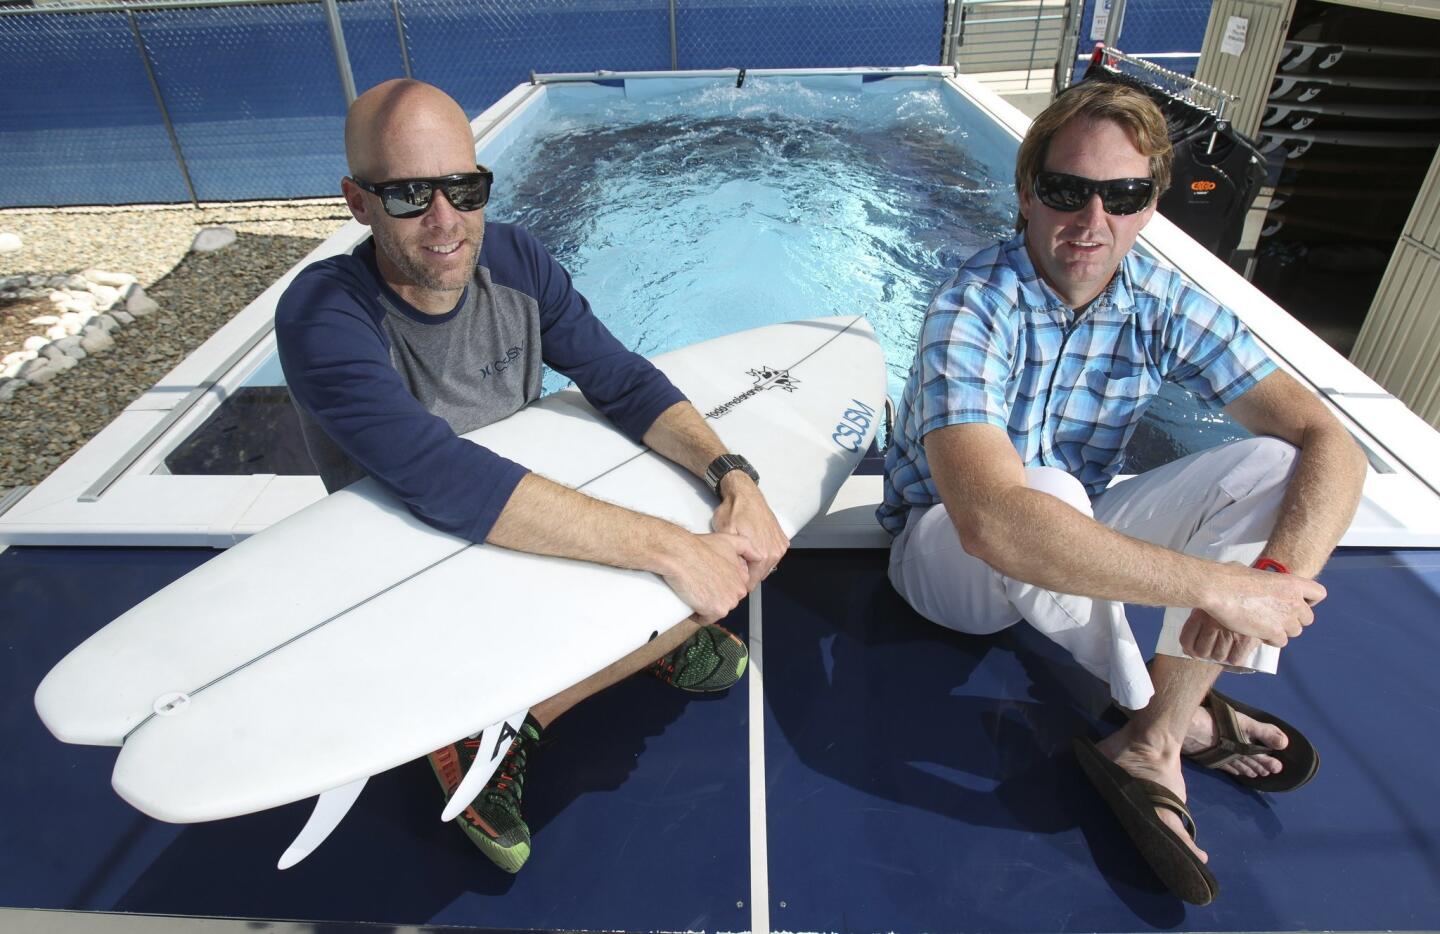 Kinesiology professors, Assistant Professor Sean Newcomer, right, and Associate Professor Jeff Nessler, sit next to the swim flume where they and their students test subjects to collect scientific data that will improve surfboard and wetsuit designs.